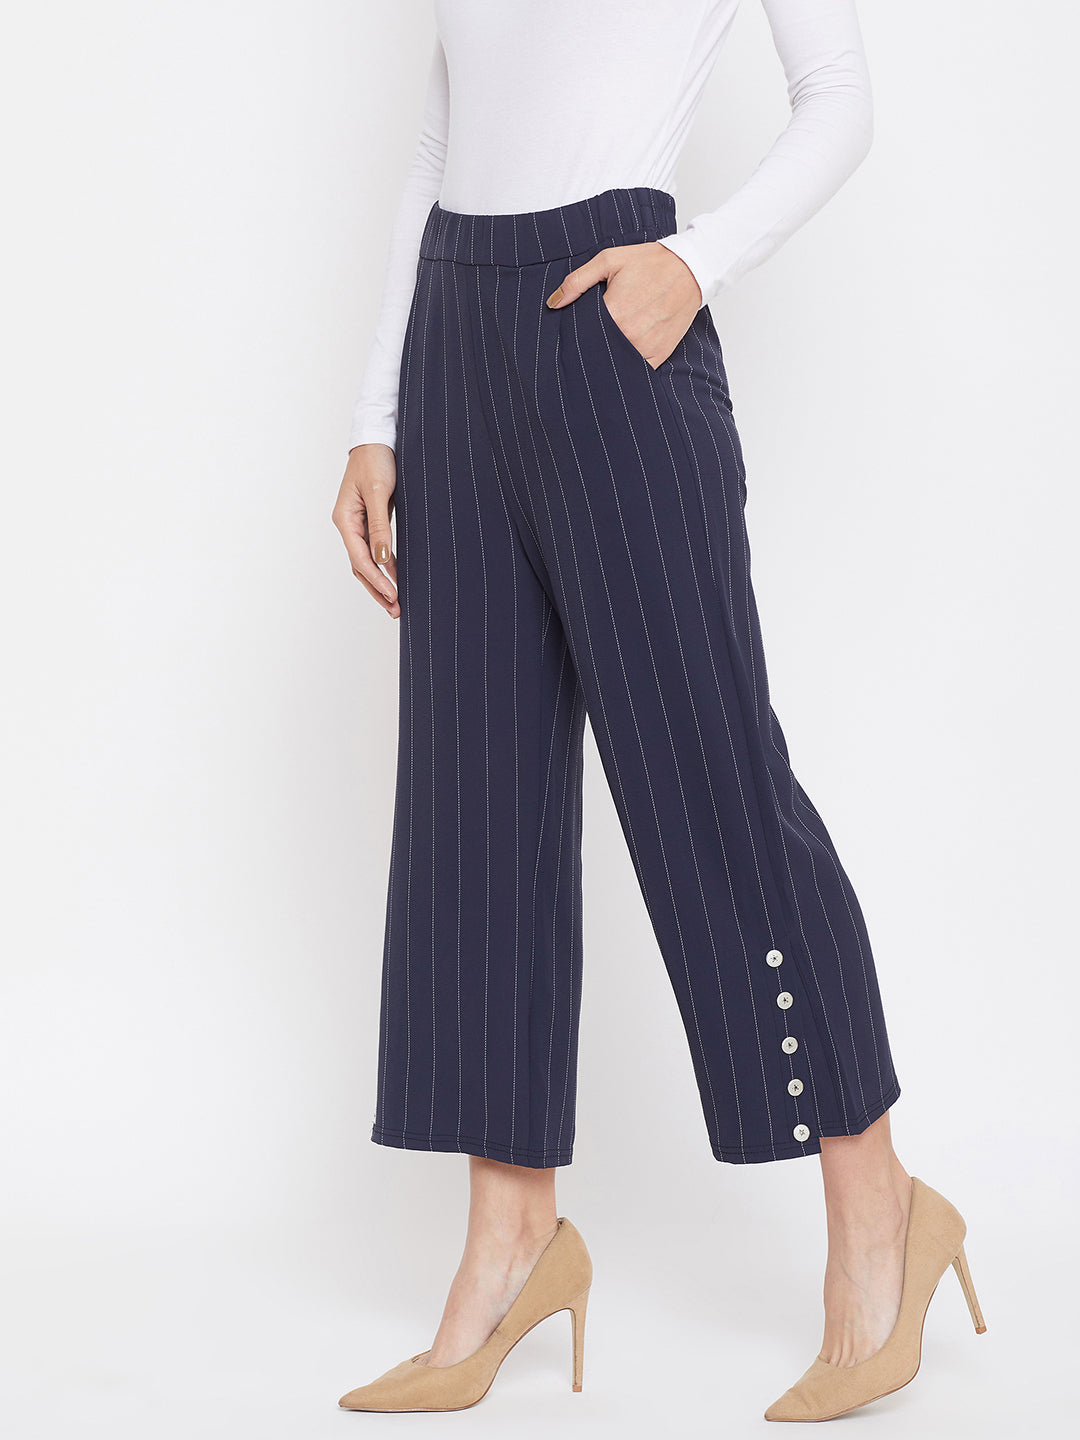 Navy Blue Striped Parallel Trousers - Women Trousers